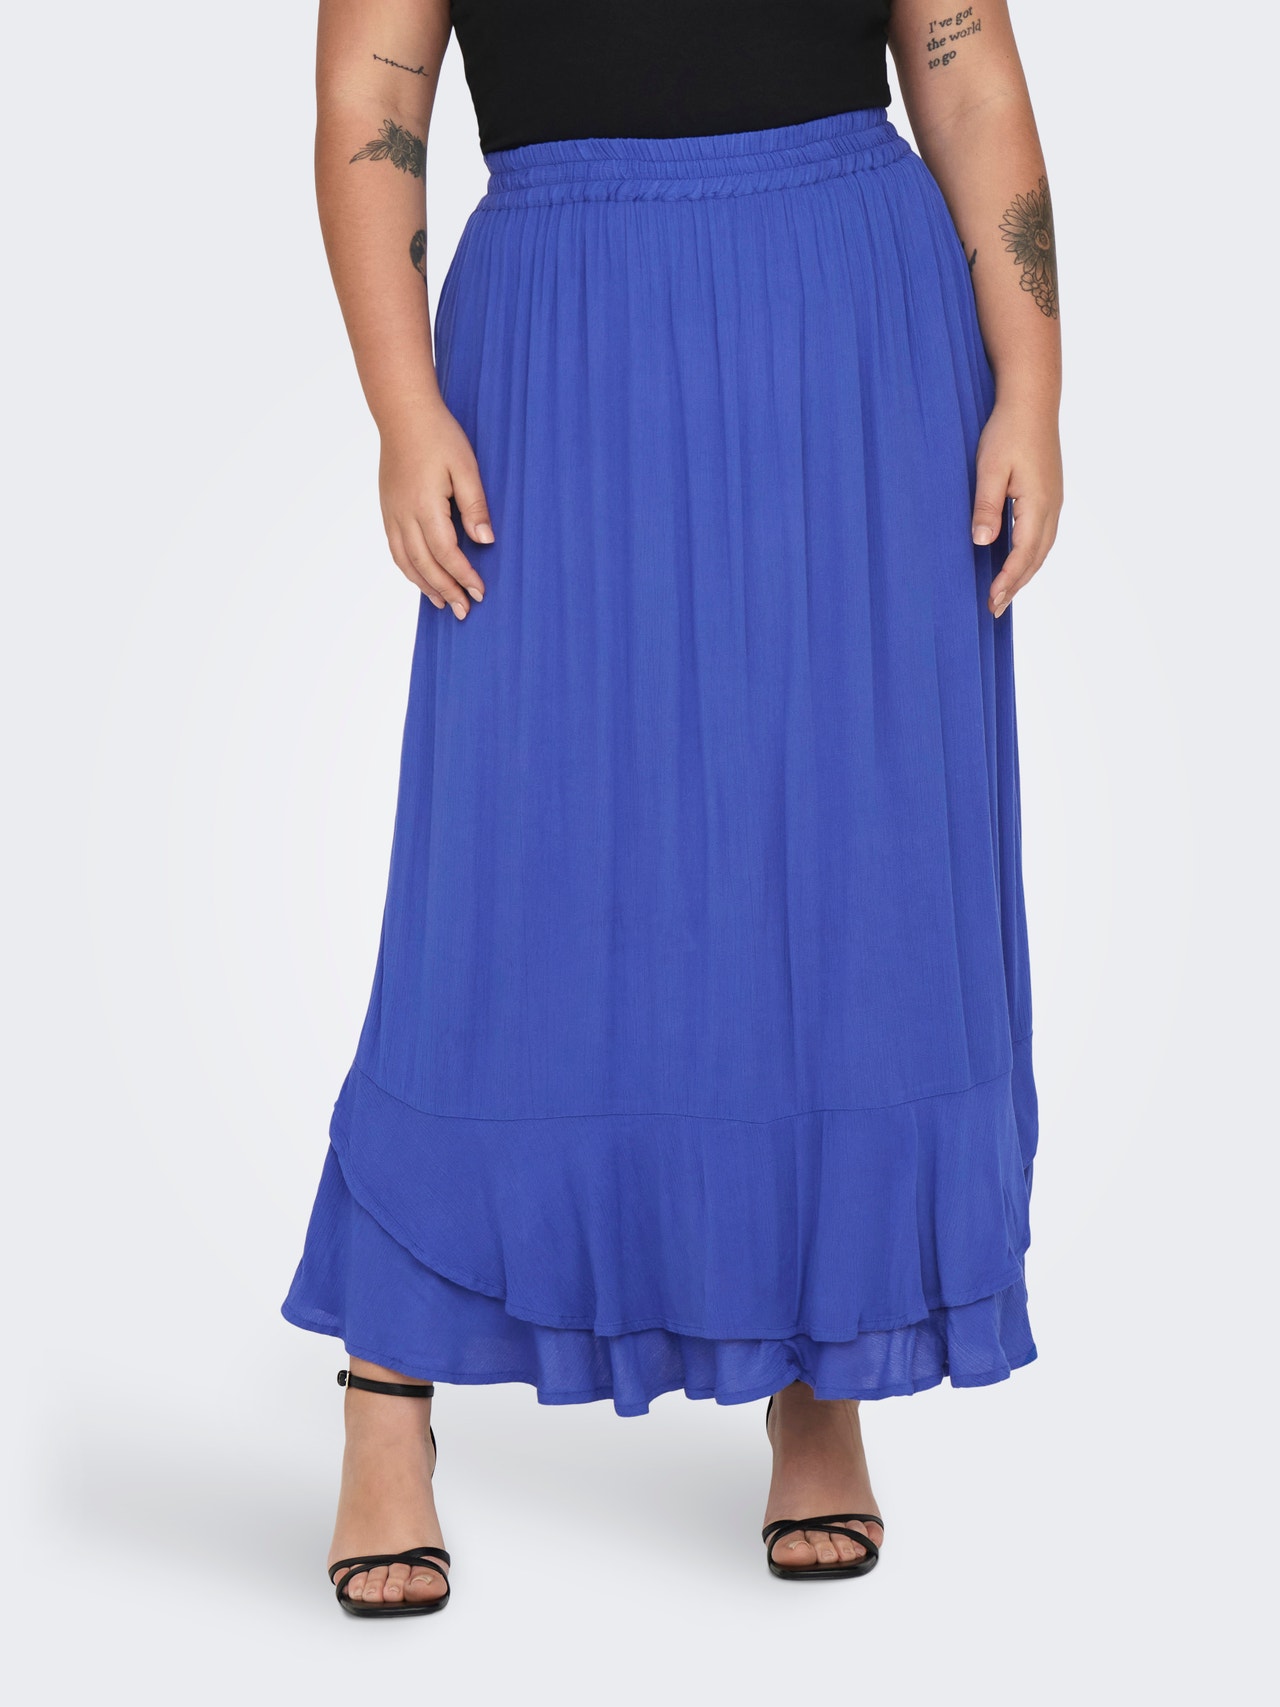 ONLY Long skirt -Dazzling Blue - 15290011